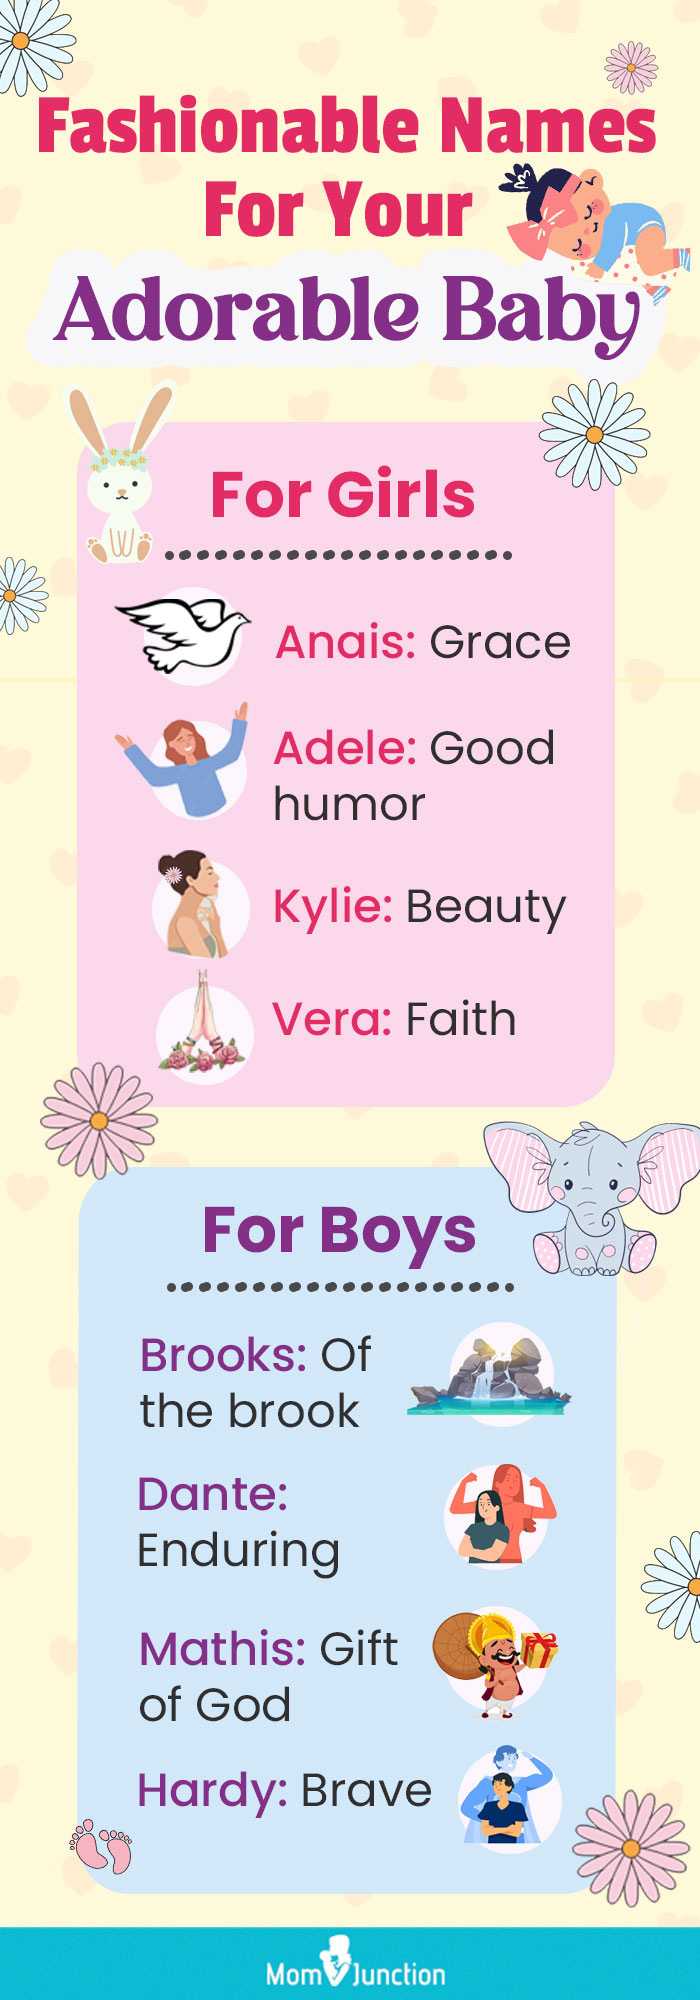 fashionable names for your adorable baby (infographic)